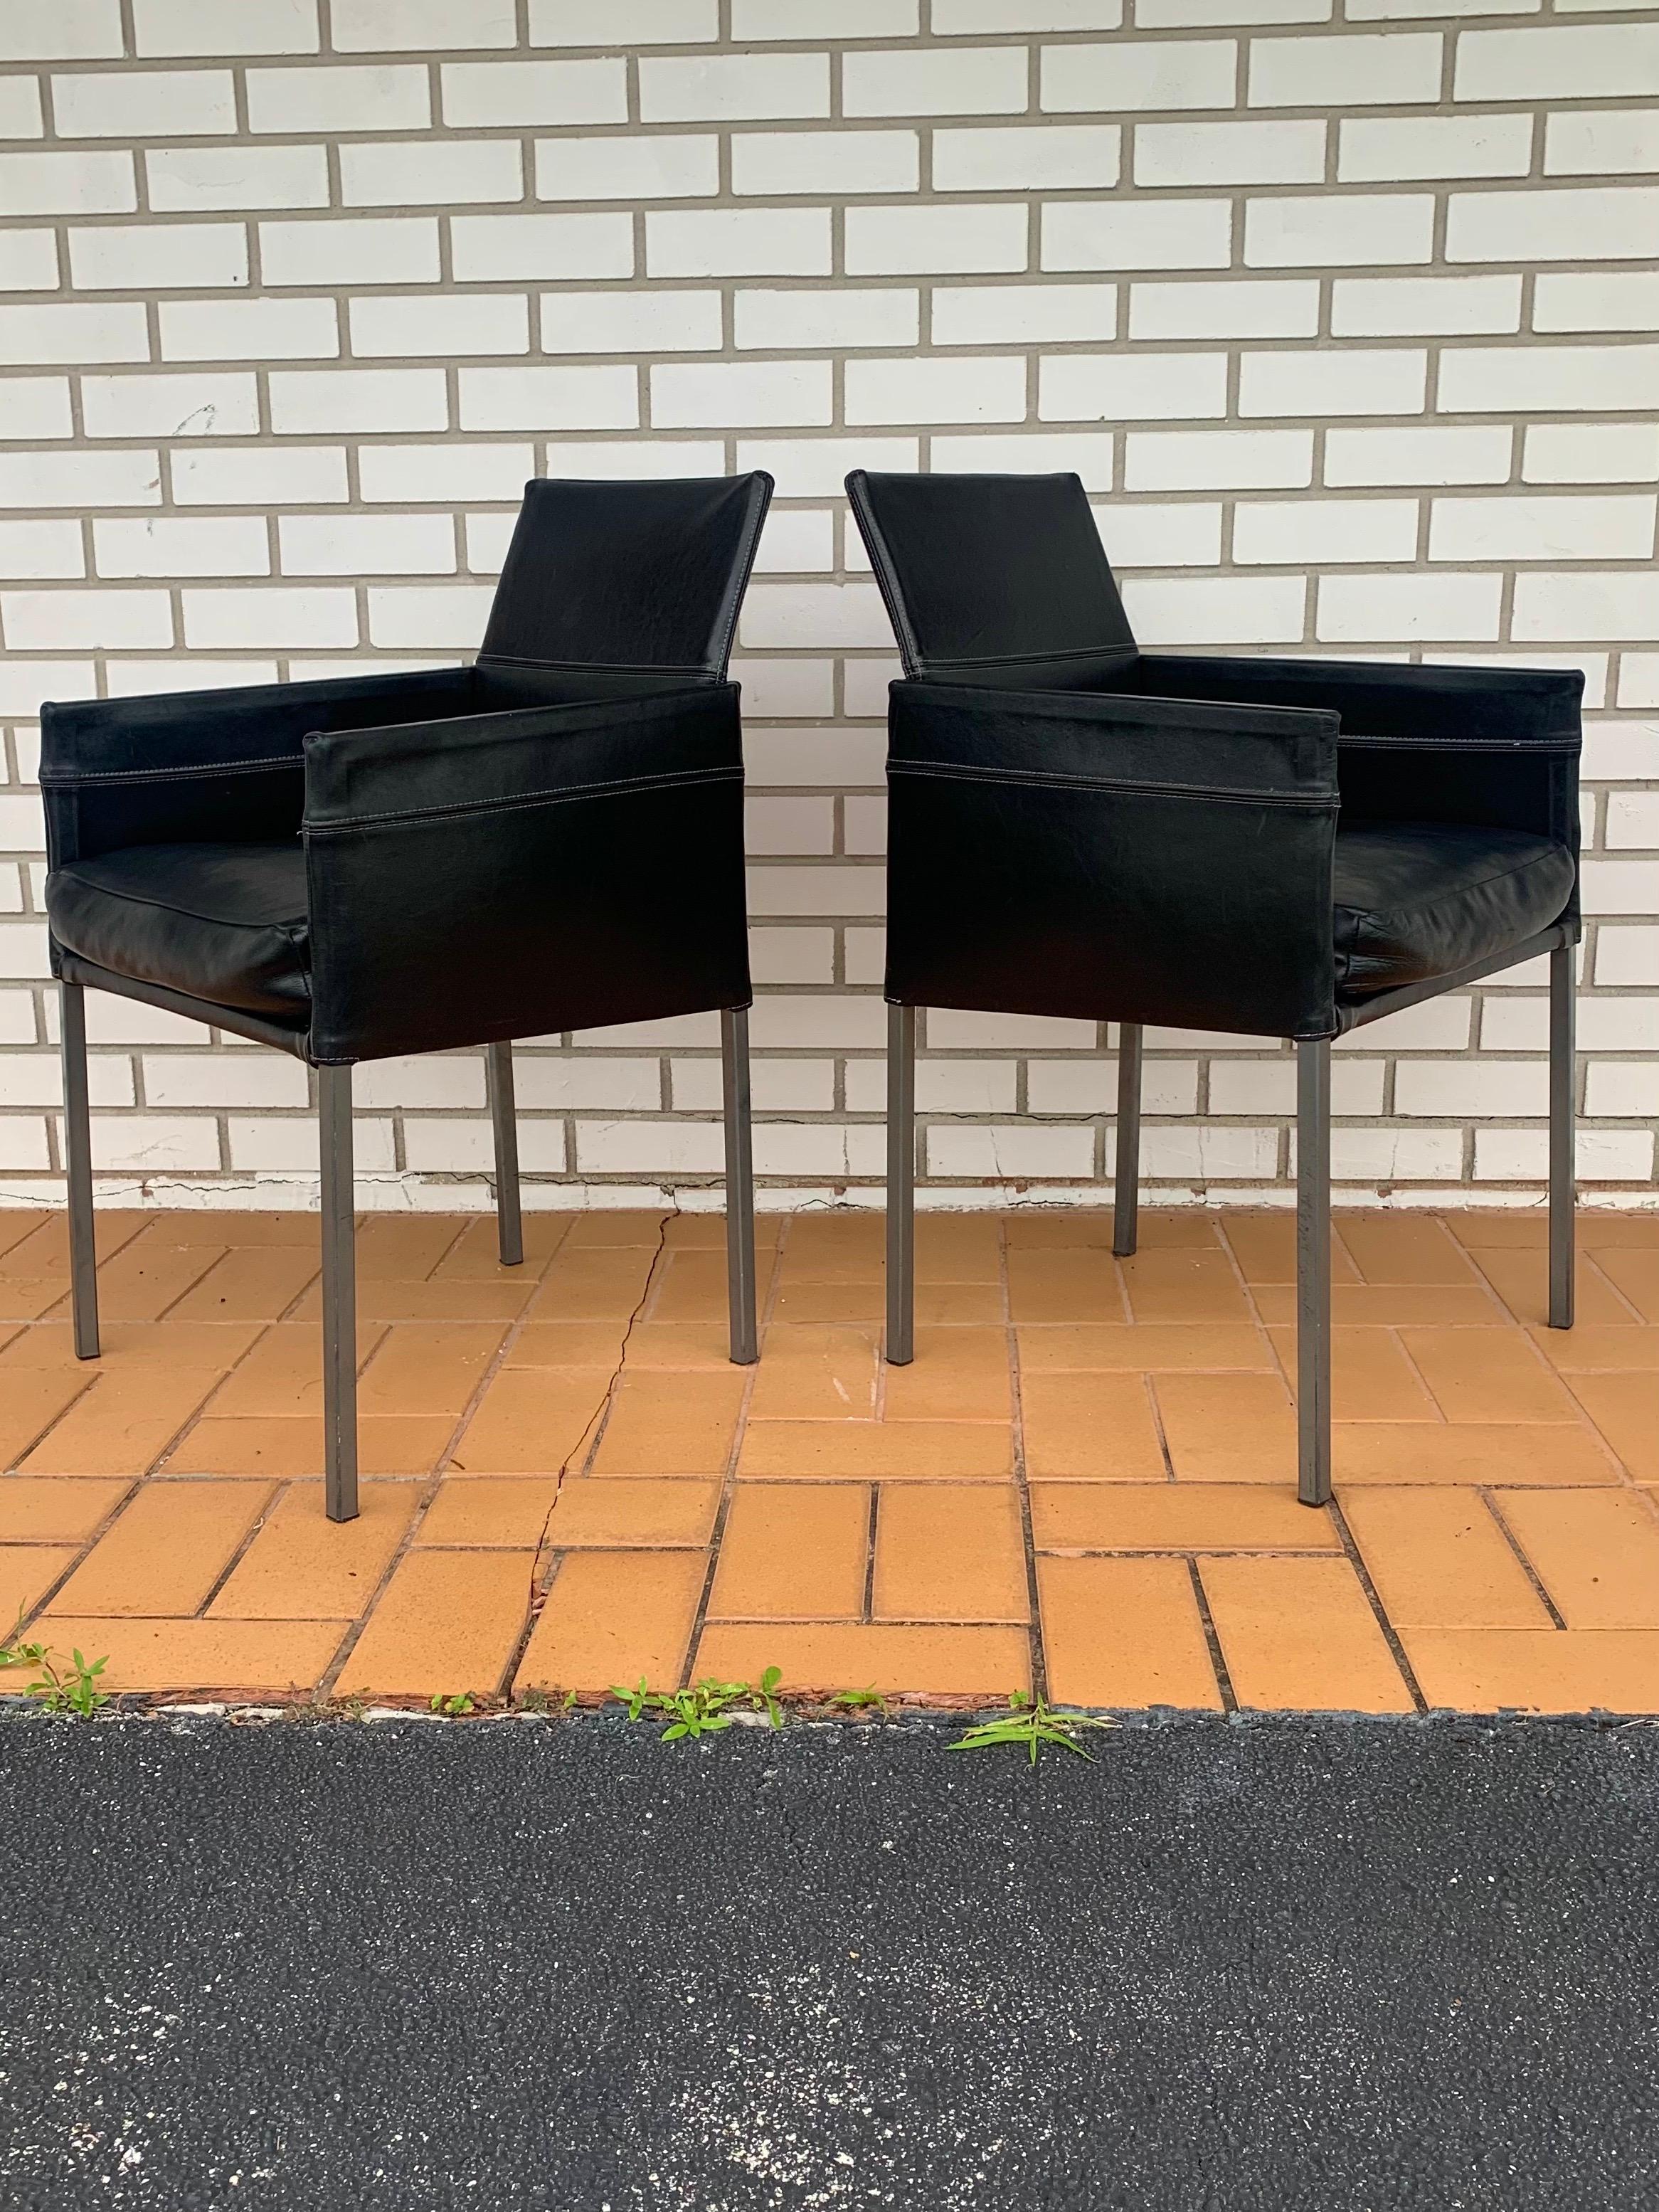 Pair of arm chairs designed by Karl Friedrich Forster for KFF. Made in Germany. Original design is intended for dining chairs but they are comfortable enough to be used as lounge chairs or accent chairs with a smaller profile. Beautiful black